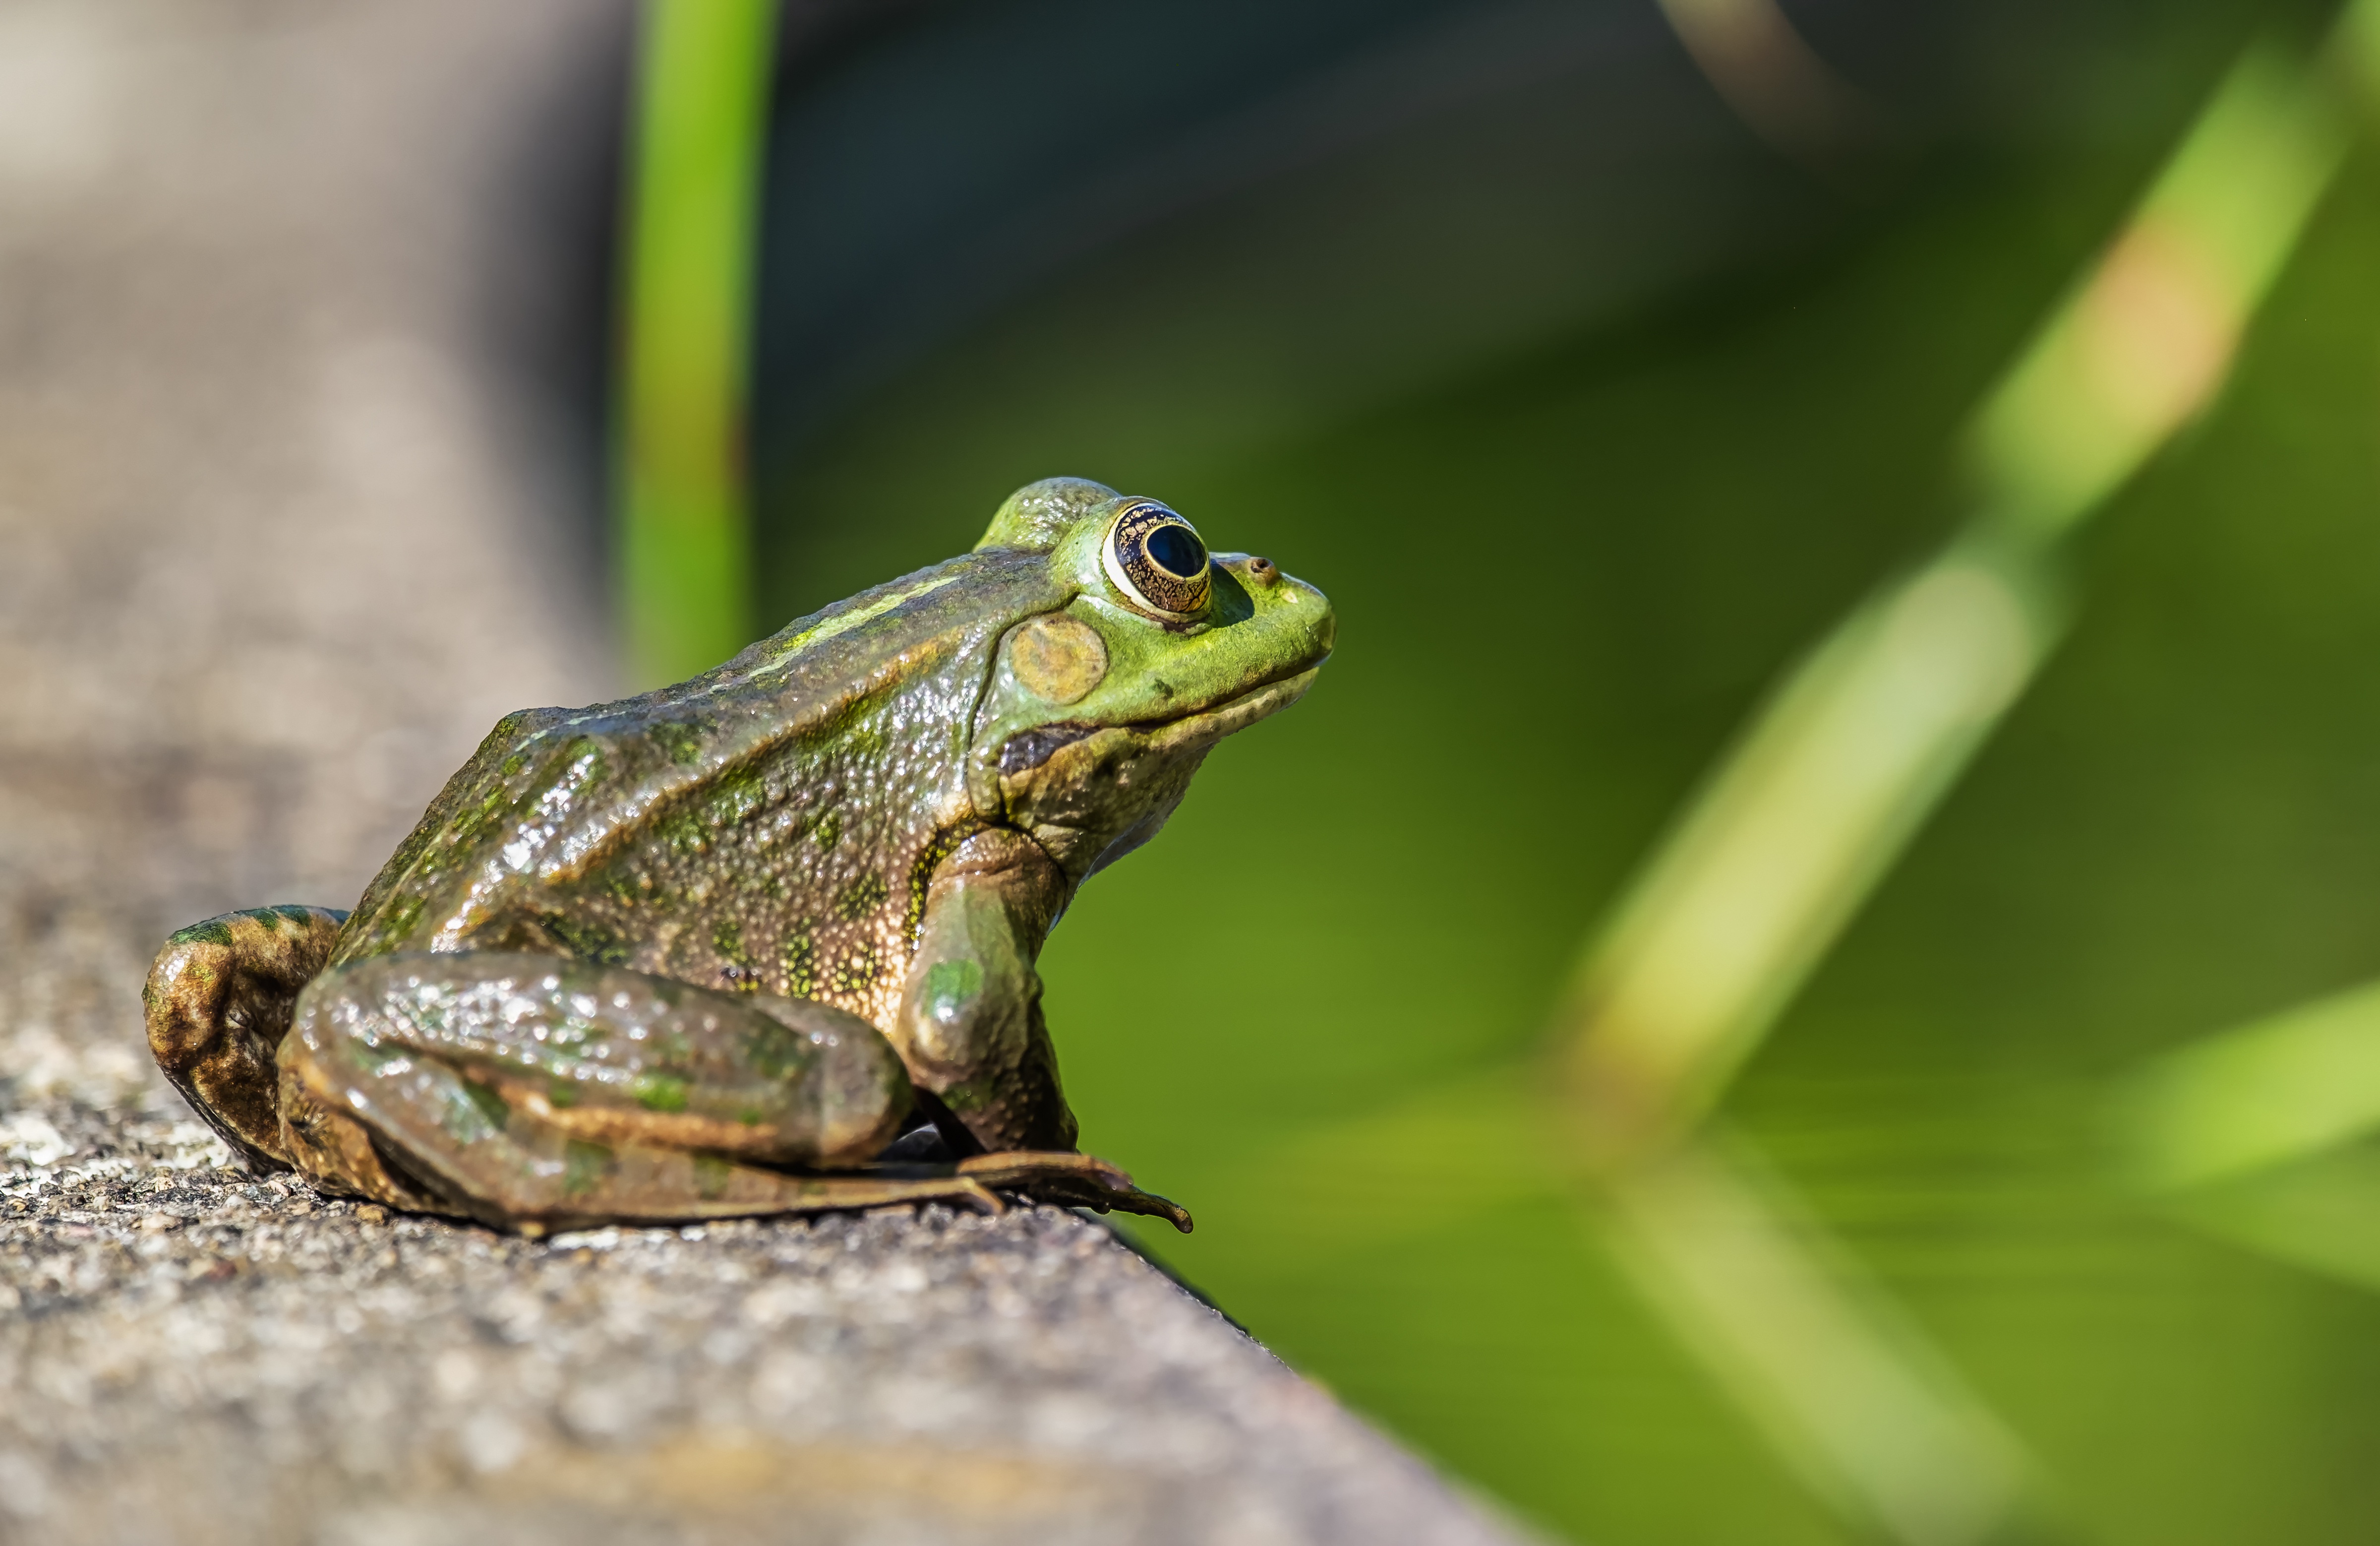 Green Frog Sitting Near a Pond by Couleur